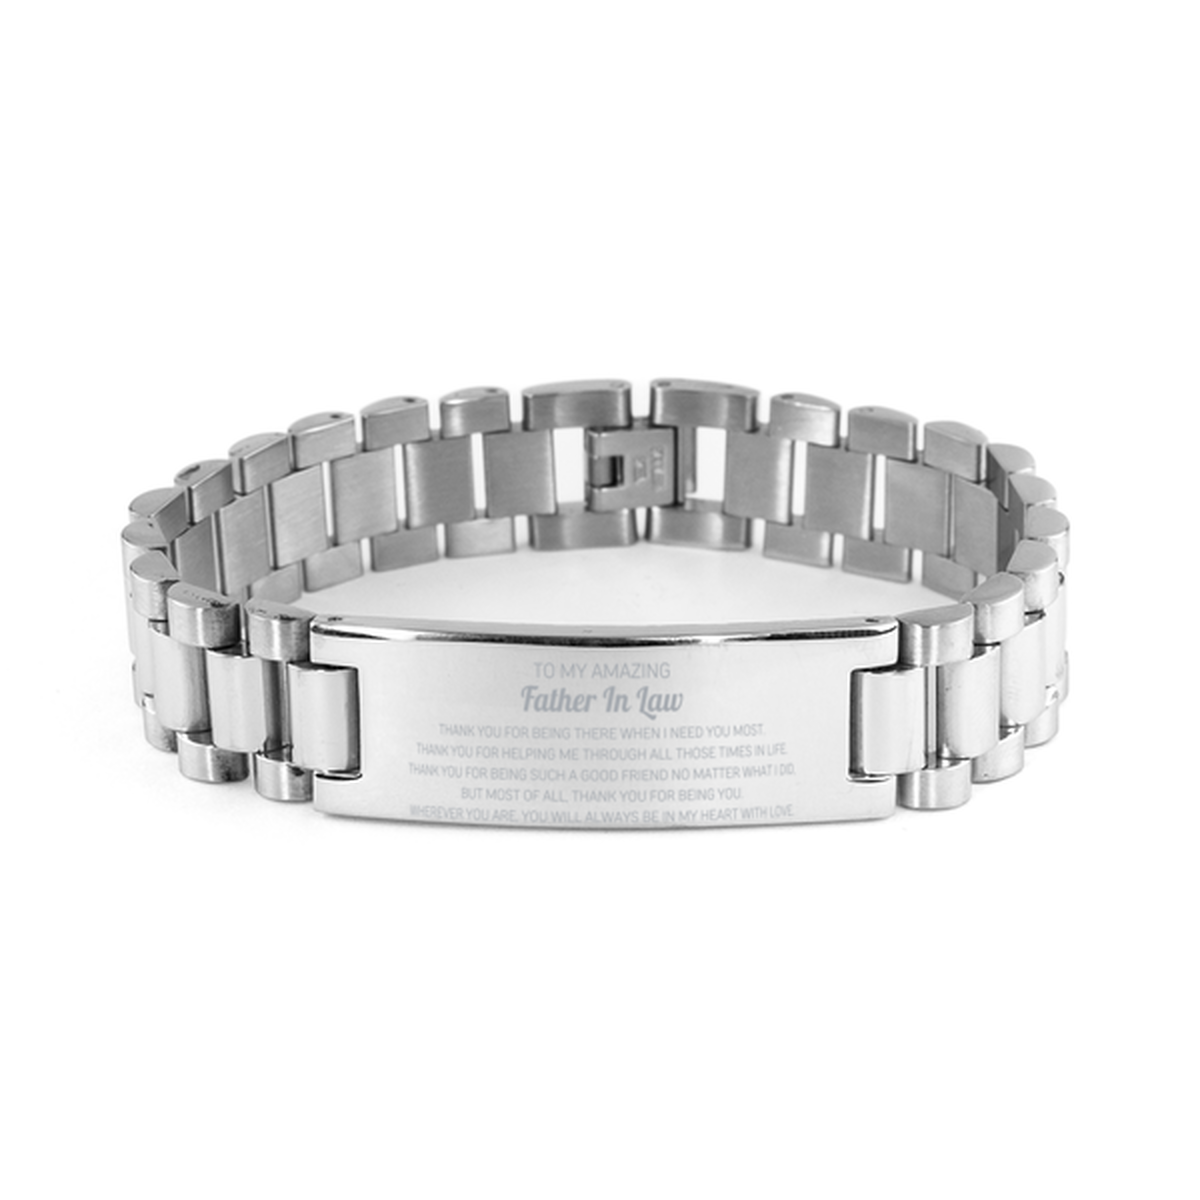 To My Amazing Father In Law Ladder Stainless Steel Bracelet, Thank you for being there, Thank You Gifts For Father In Law, Birthday, Christmas Unique Gifts For Father In Law